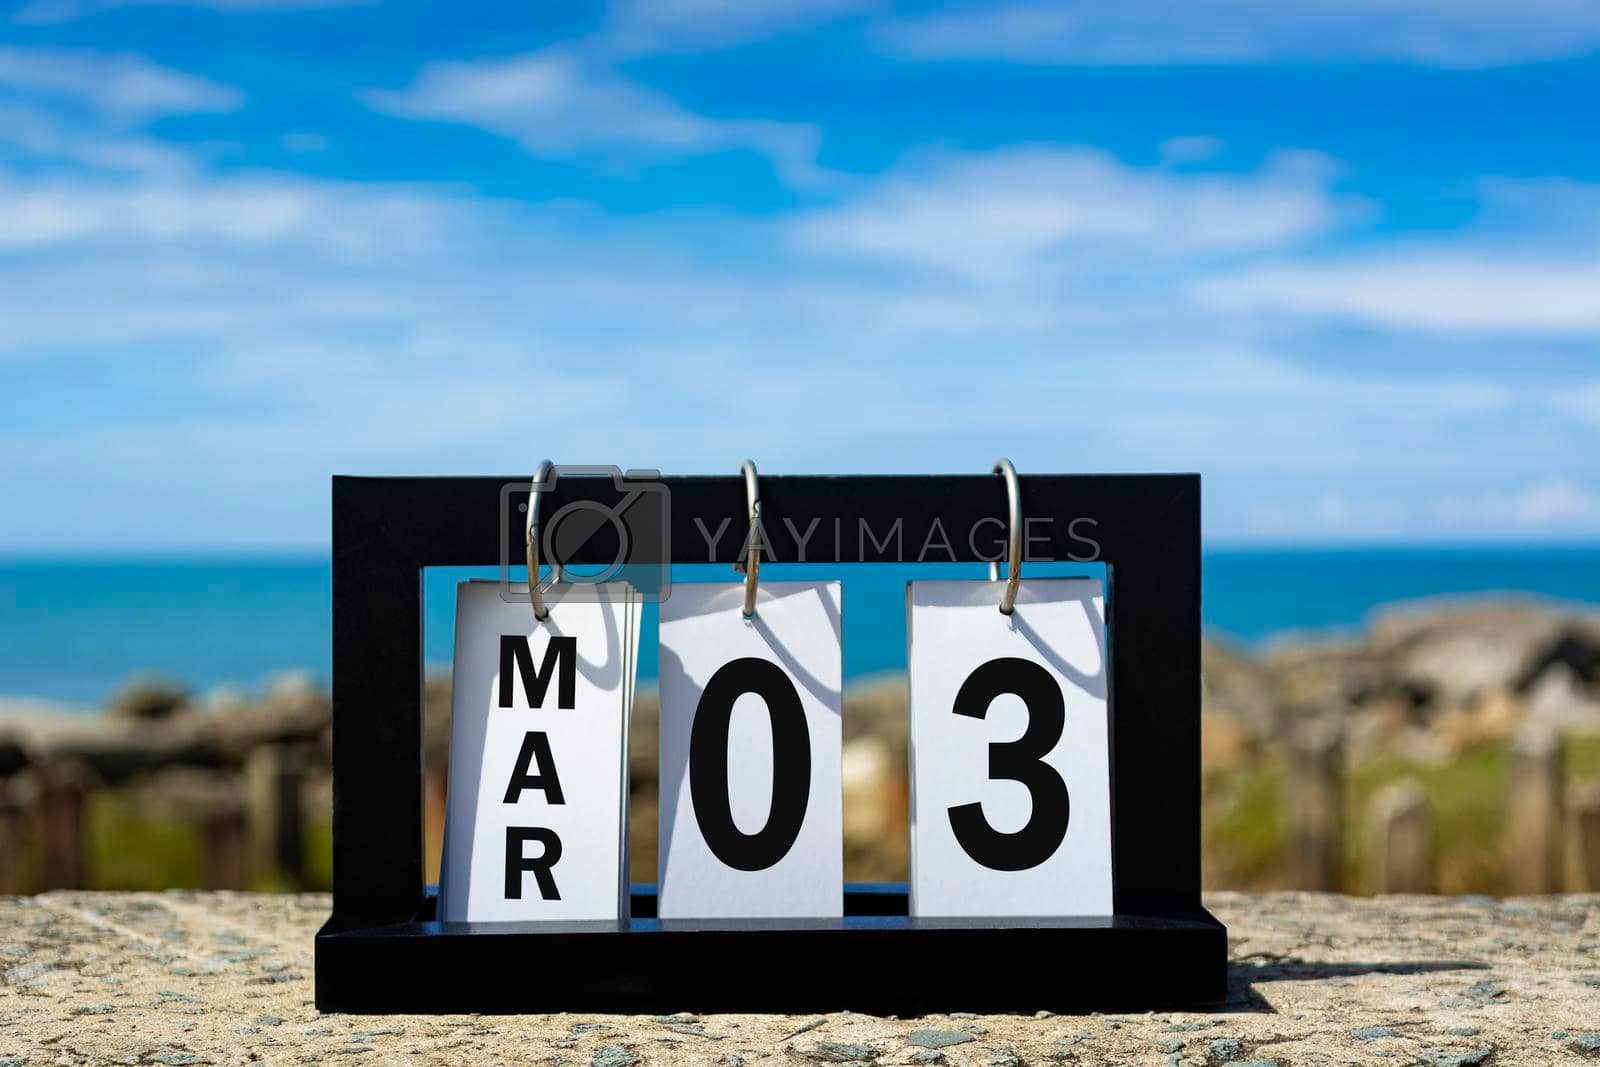 Royalty free image of Mar 03 calendar date text on wooden frame with blurred background of ocean by JennMiranda